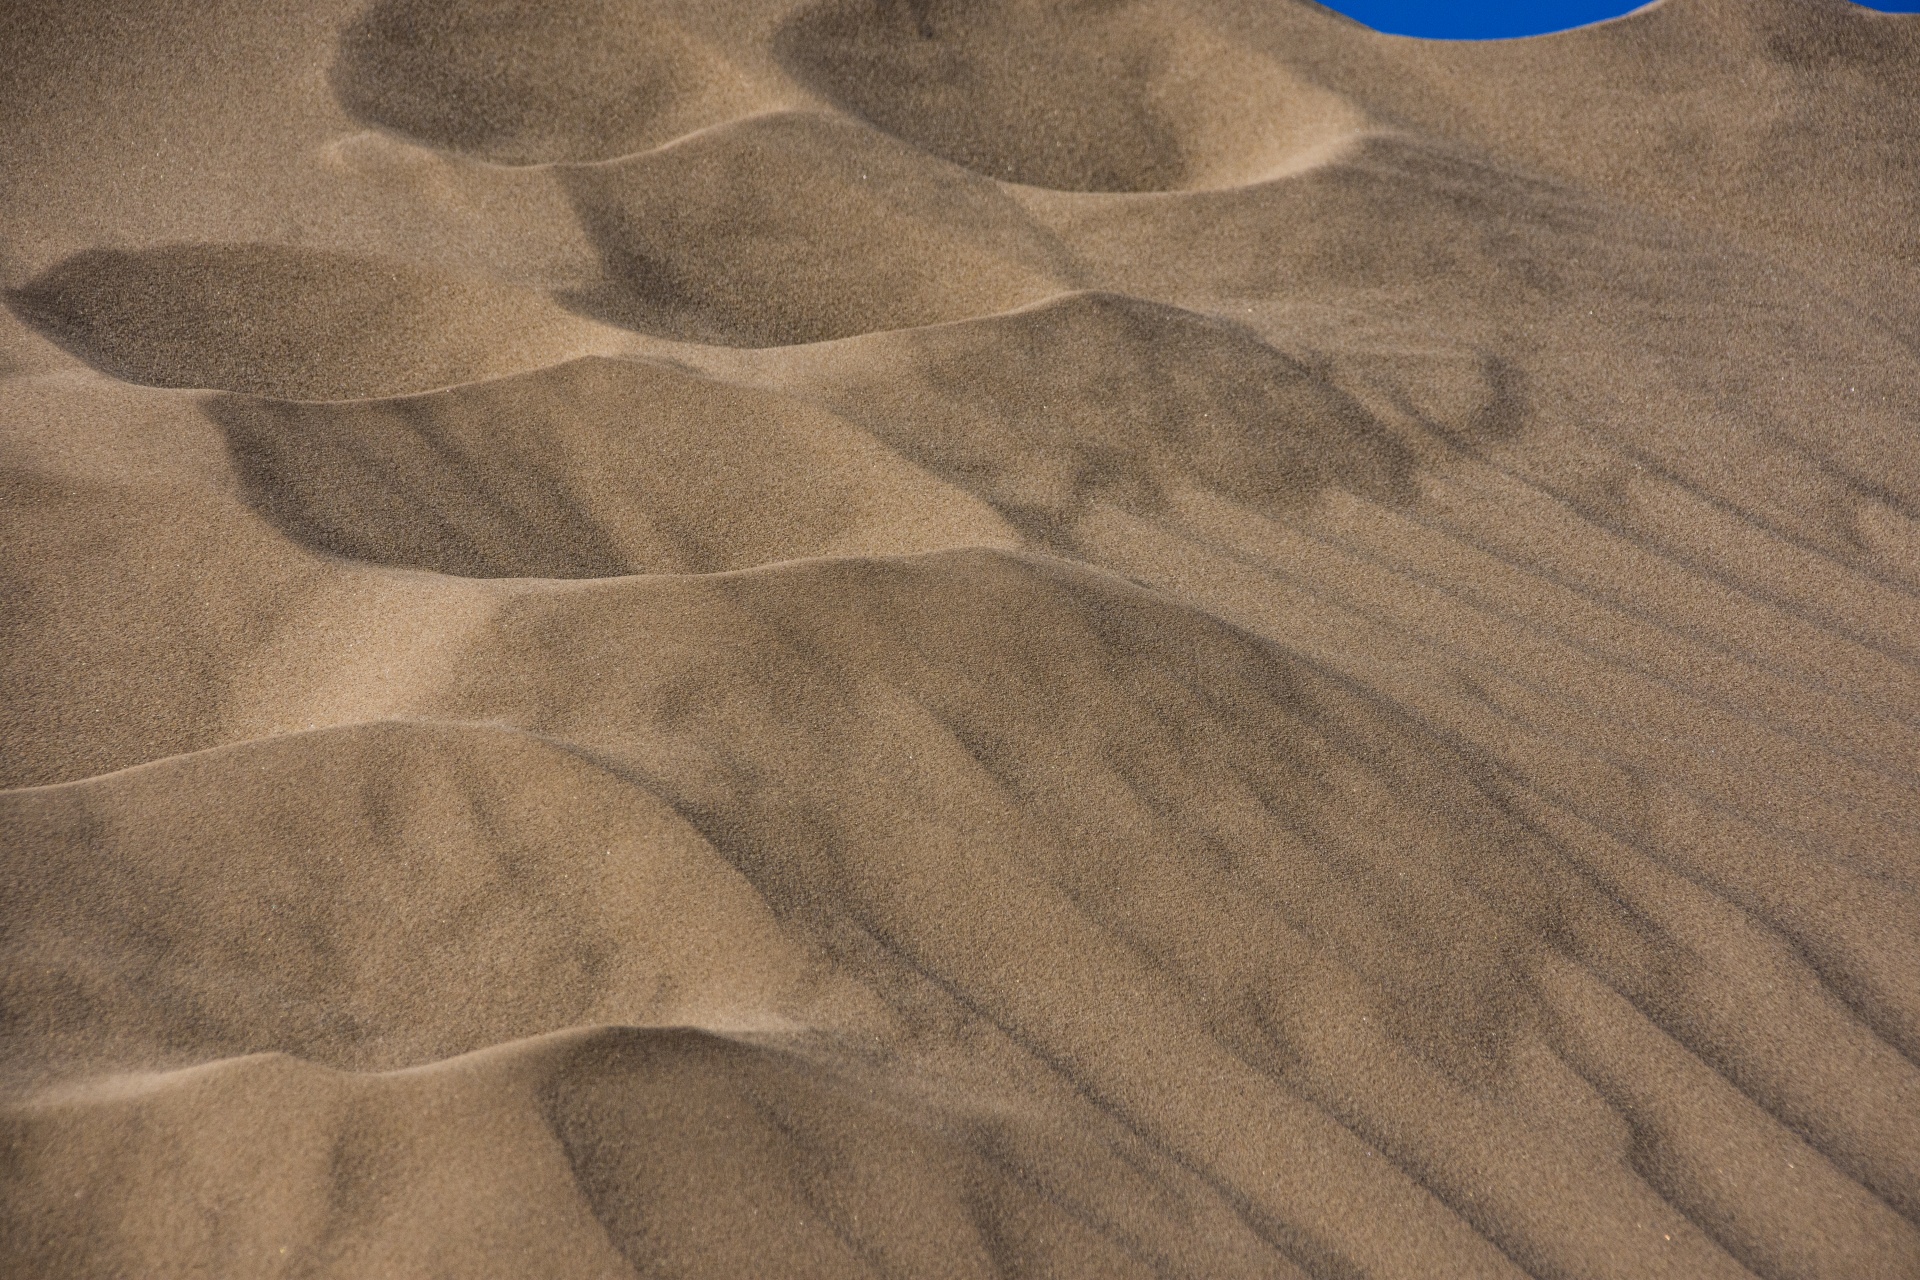 the dune buggy territory of imperial sand dunes, california